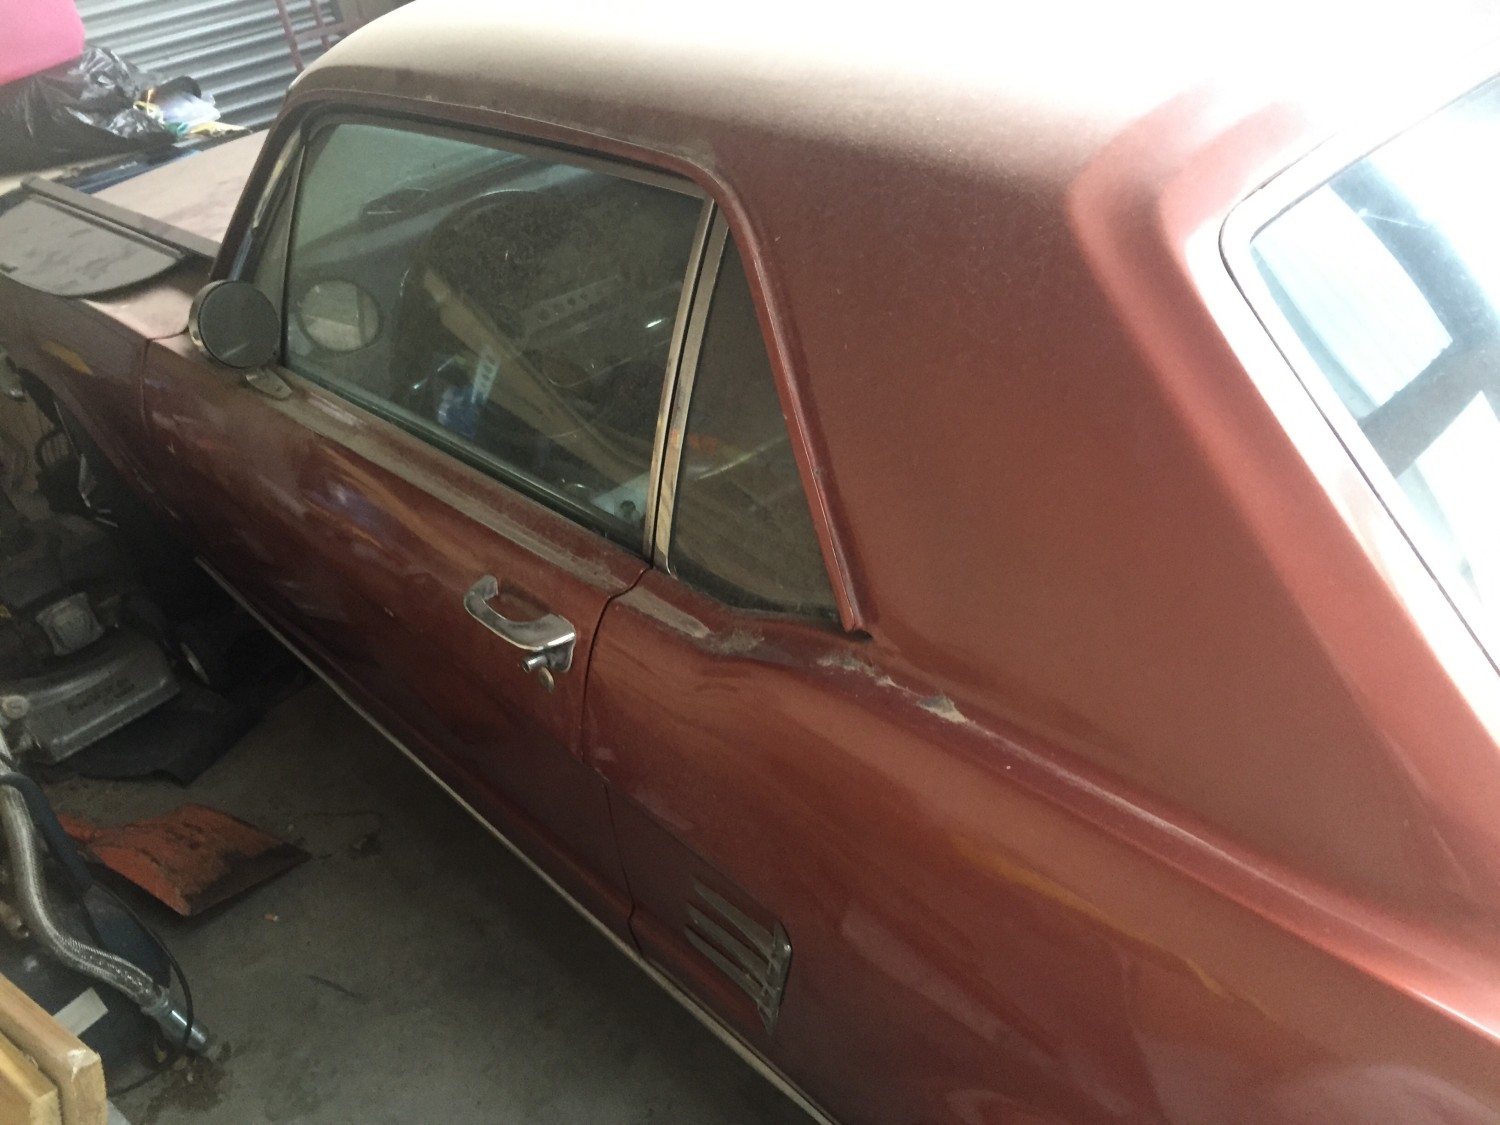 Aliciajoshemma,not sure to do to the original 289 0r go 351 Windsor.,want to tunnel ram it,Hi in the process of restoring my 66 mustang .,any suggestions